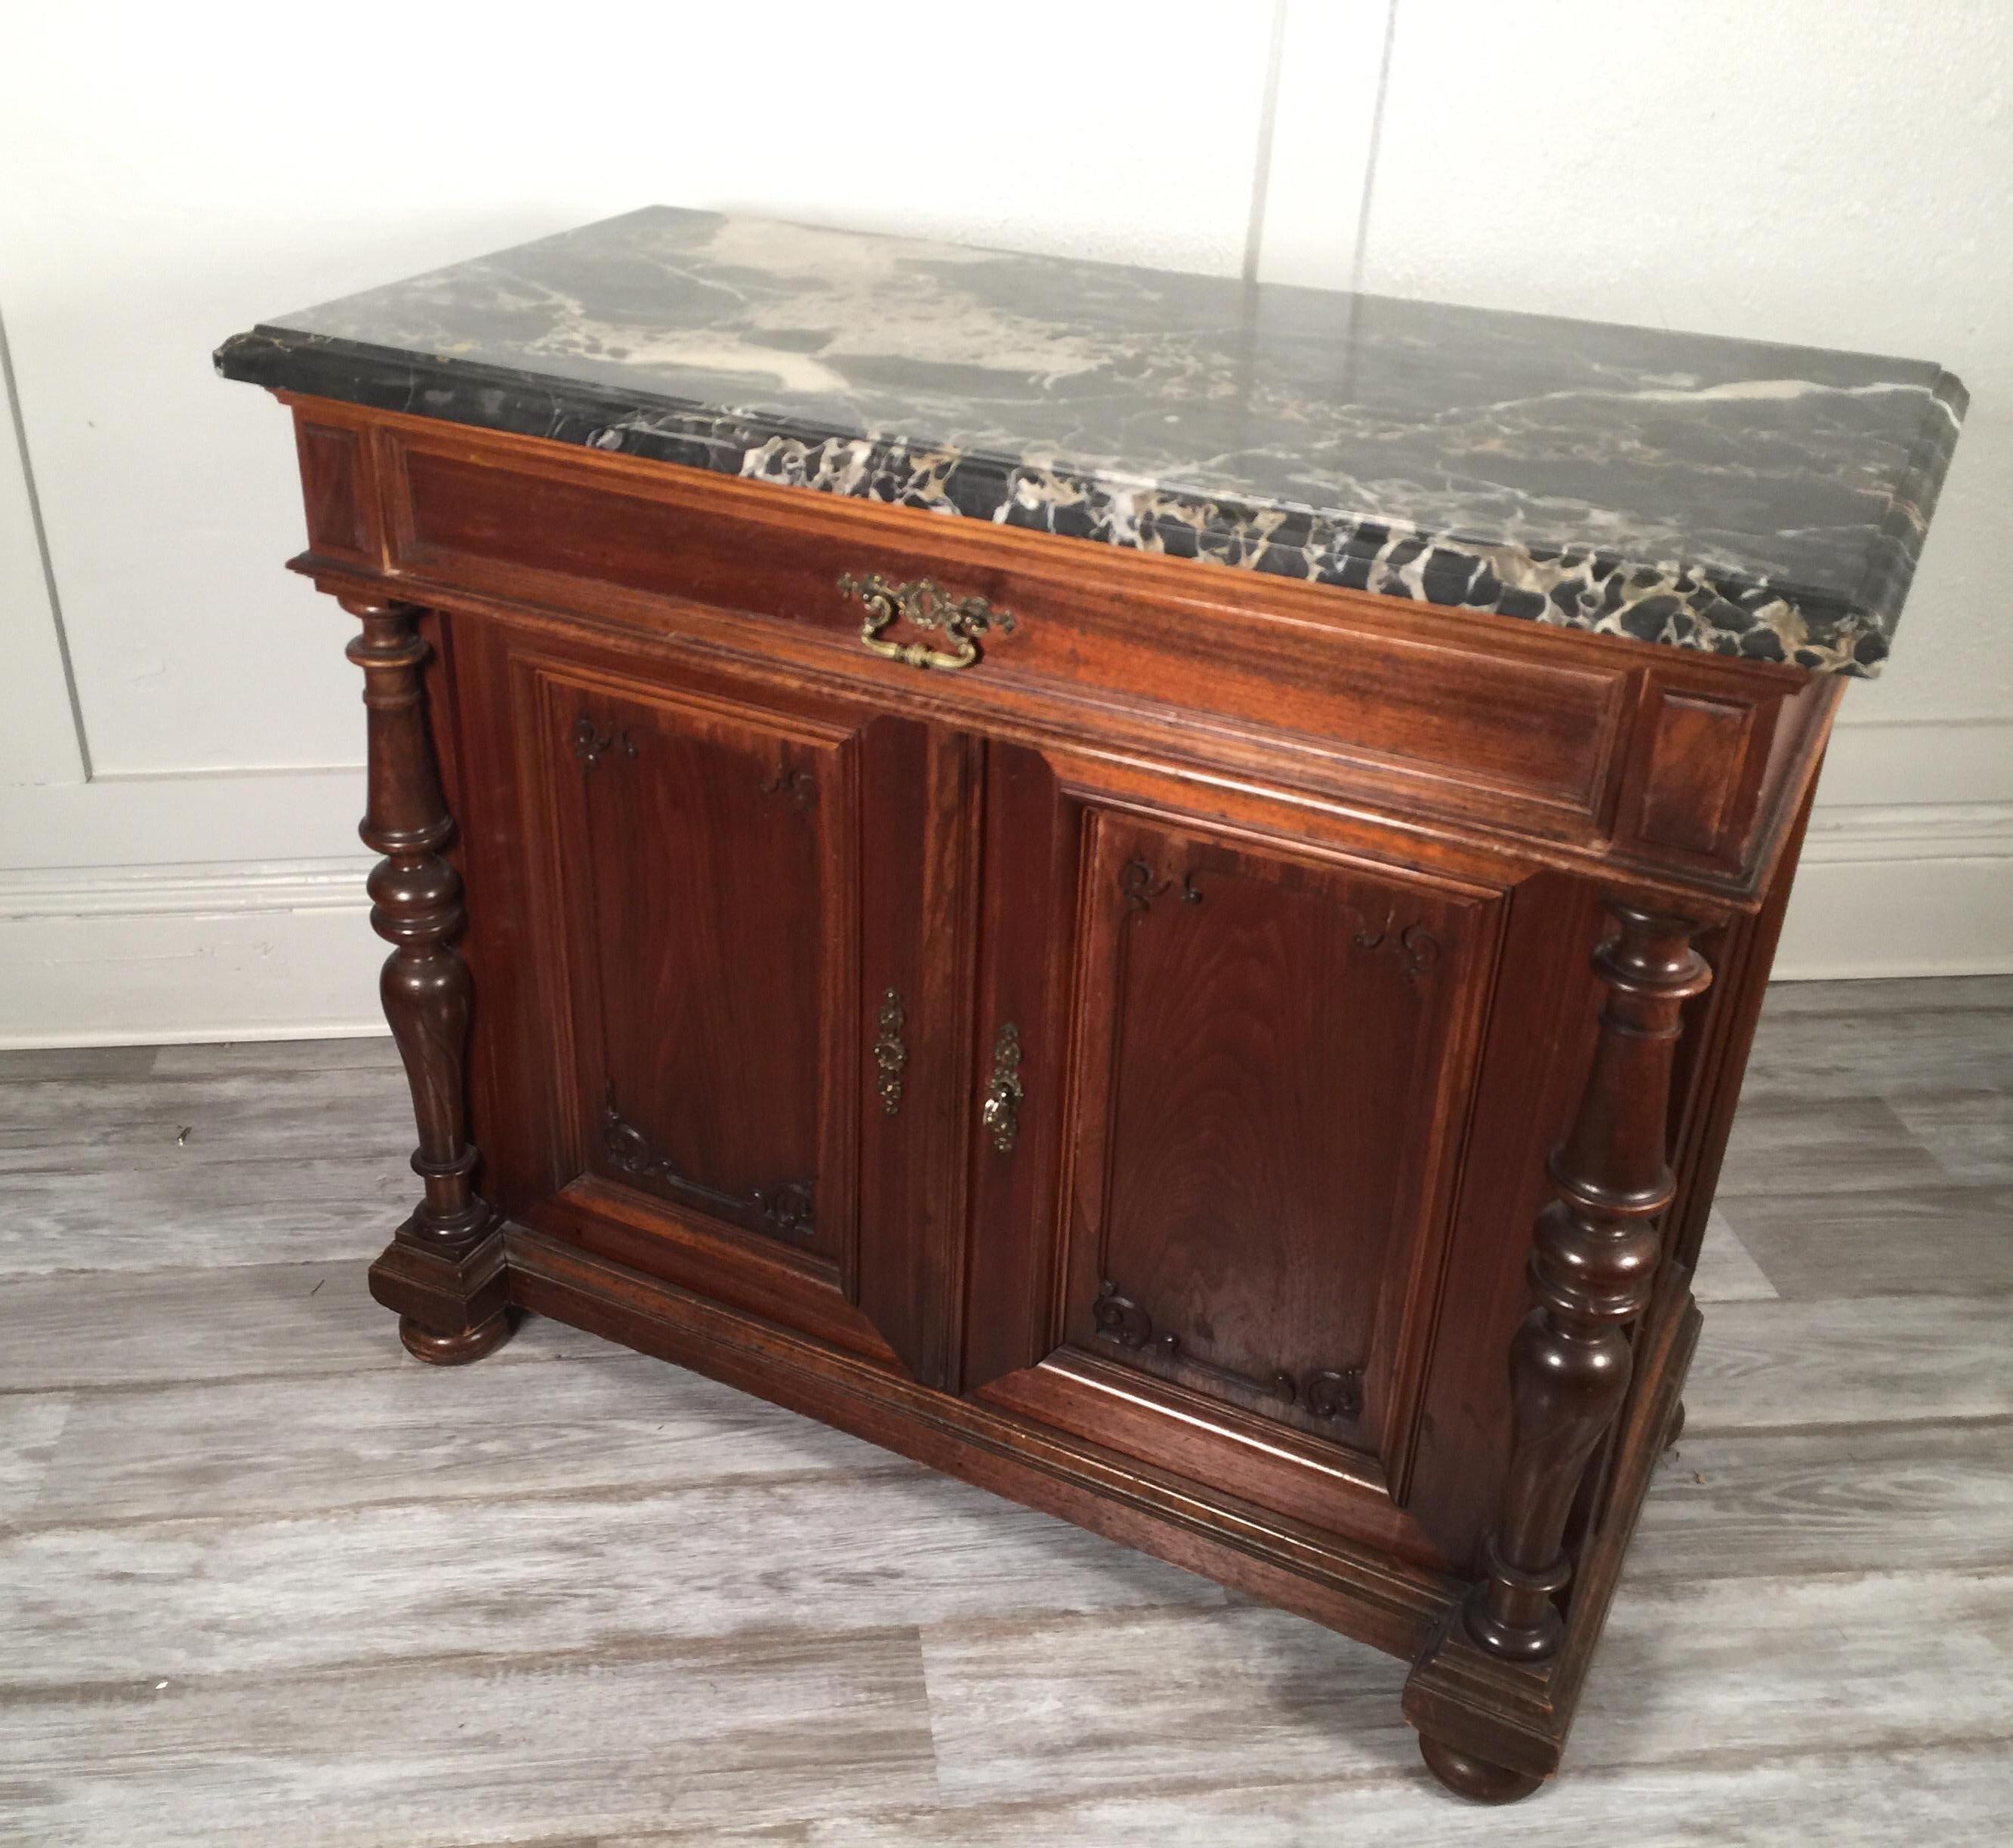 European walnut carved marble-top, two-drawer, two-door cabinet, bar
Beautiful Italian marble, chest, server or could be used as a dry bar
Dimensions: 20